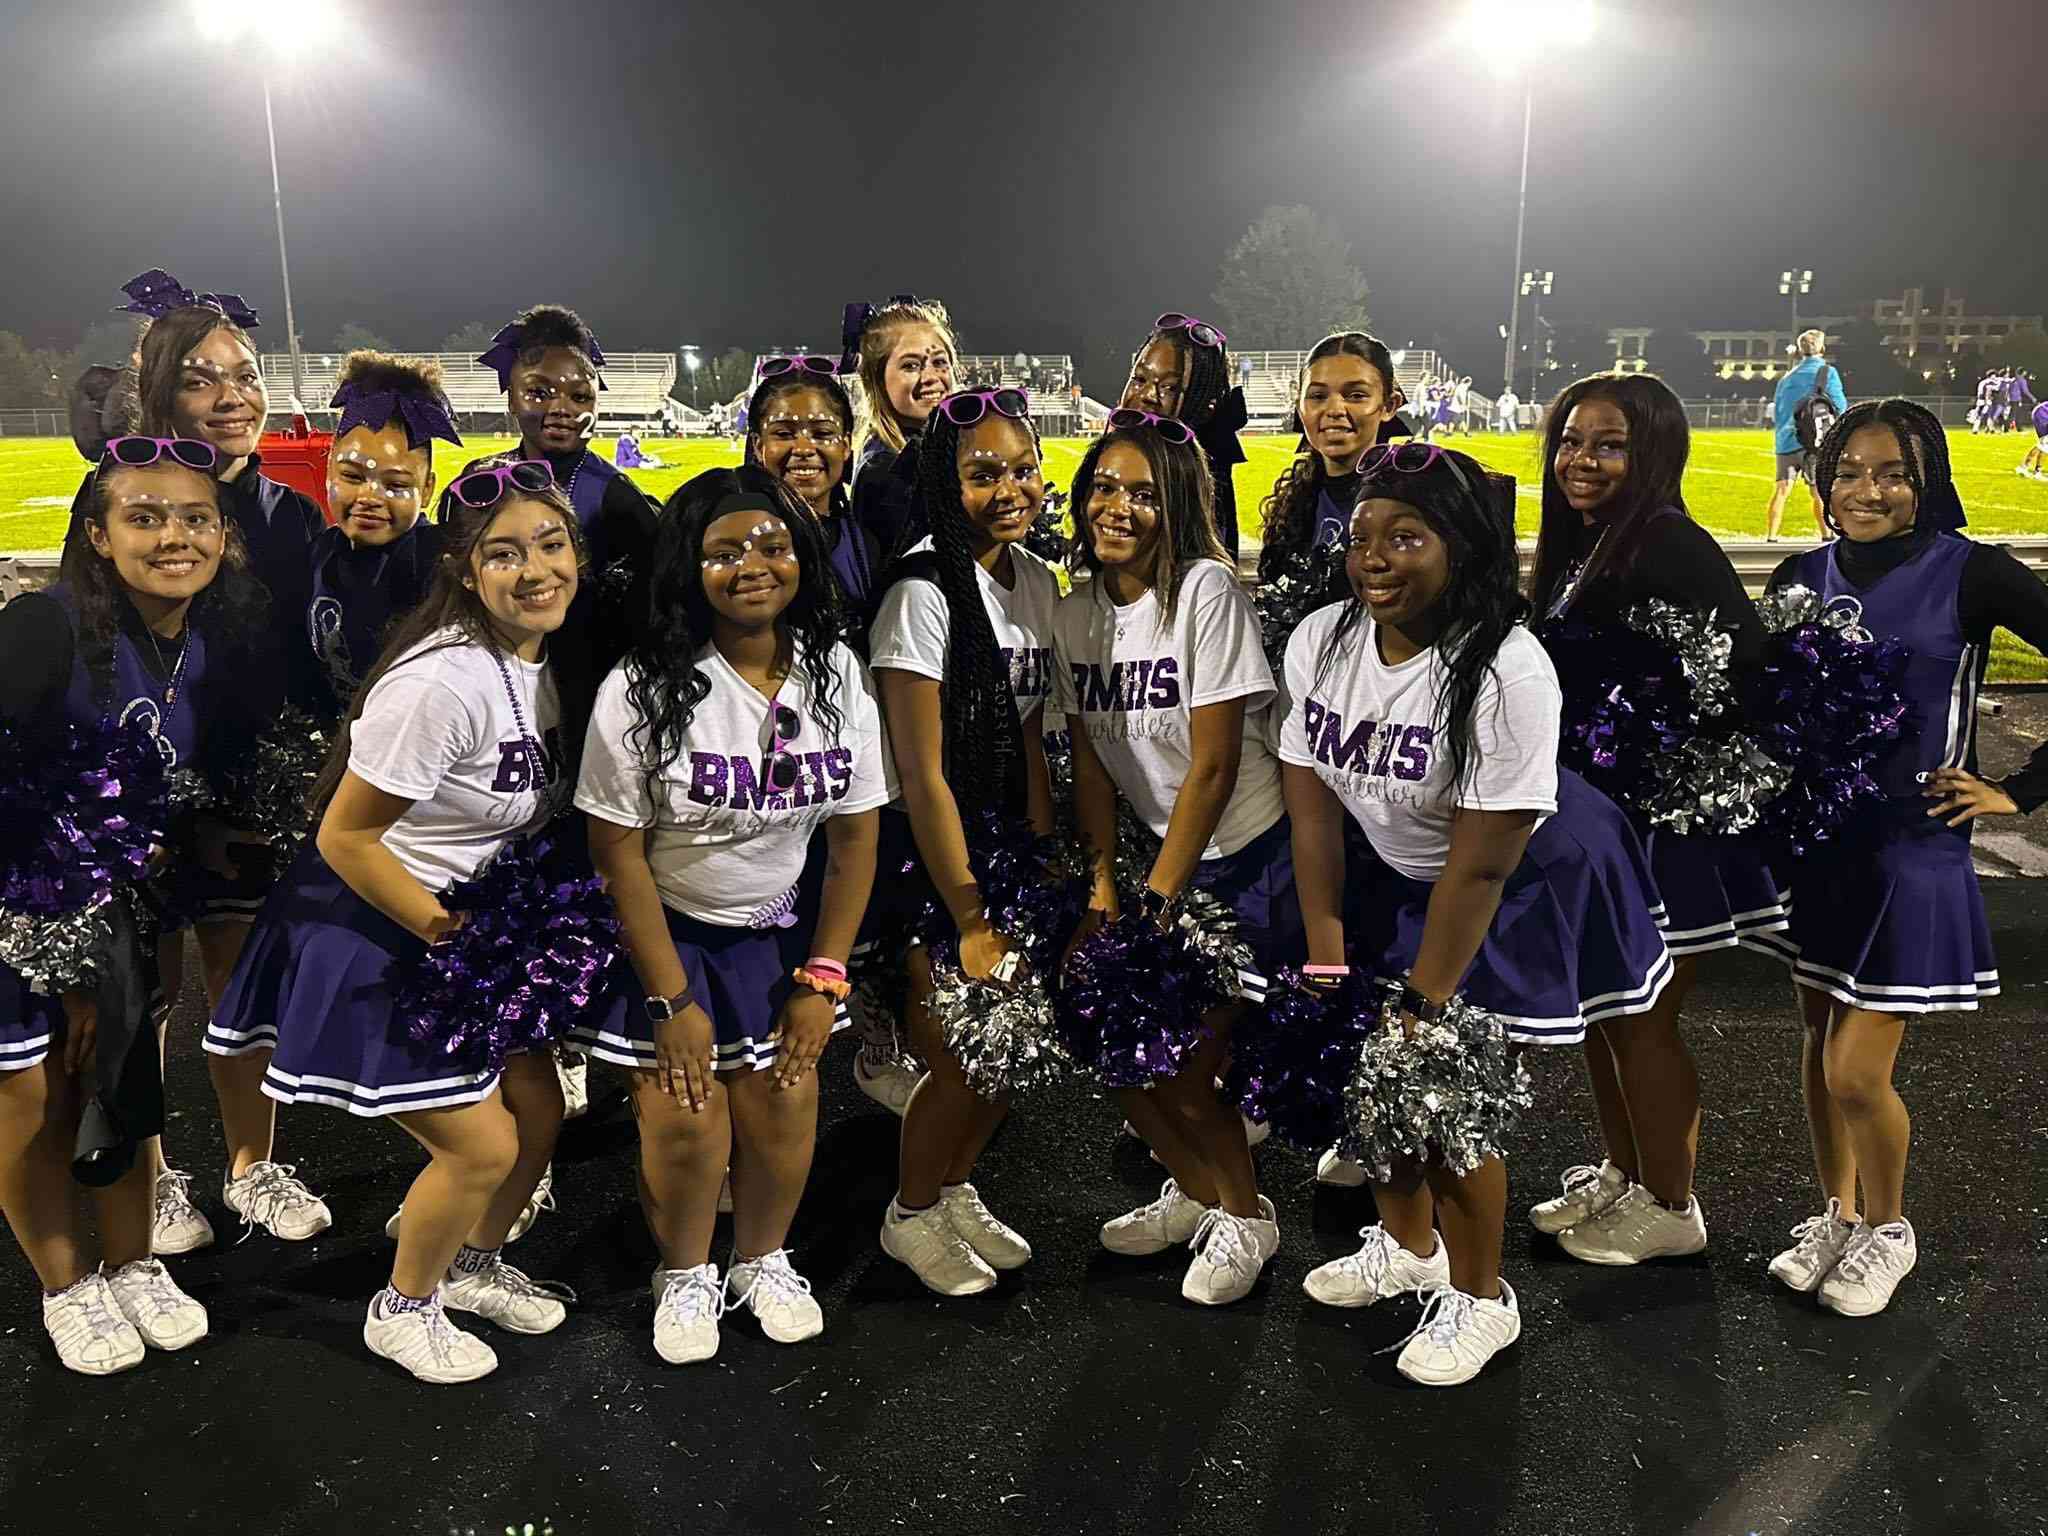 BMHS Cheer Uniform Campaign for Students in Need Image